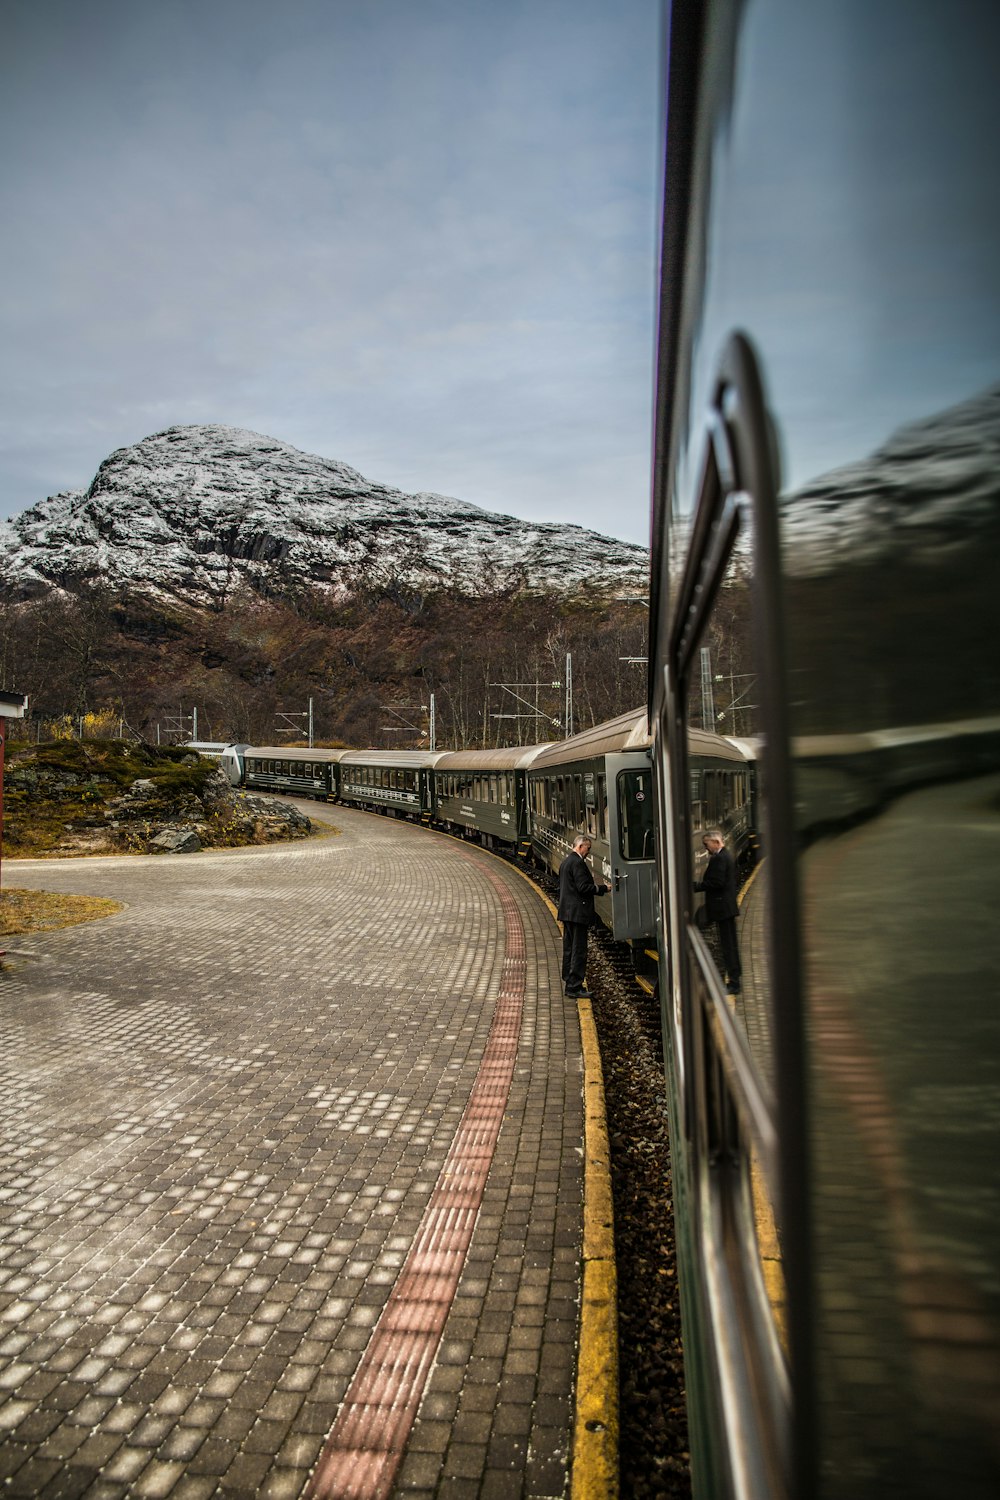 train view with mountain